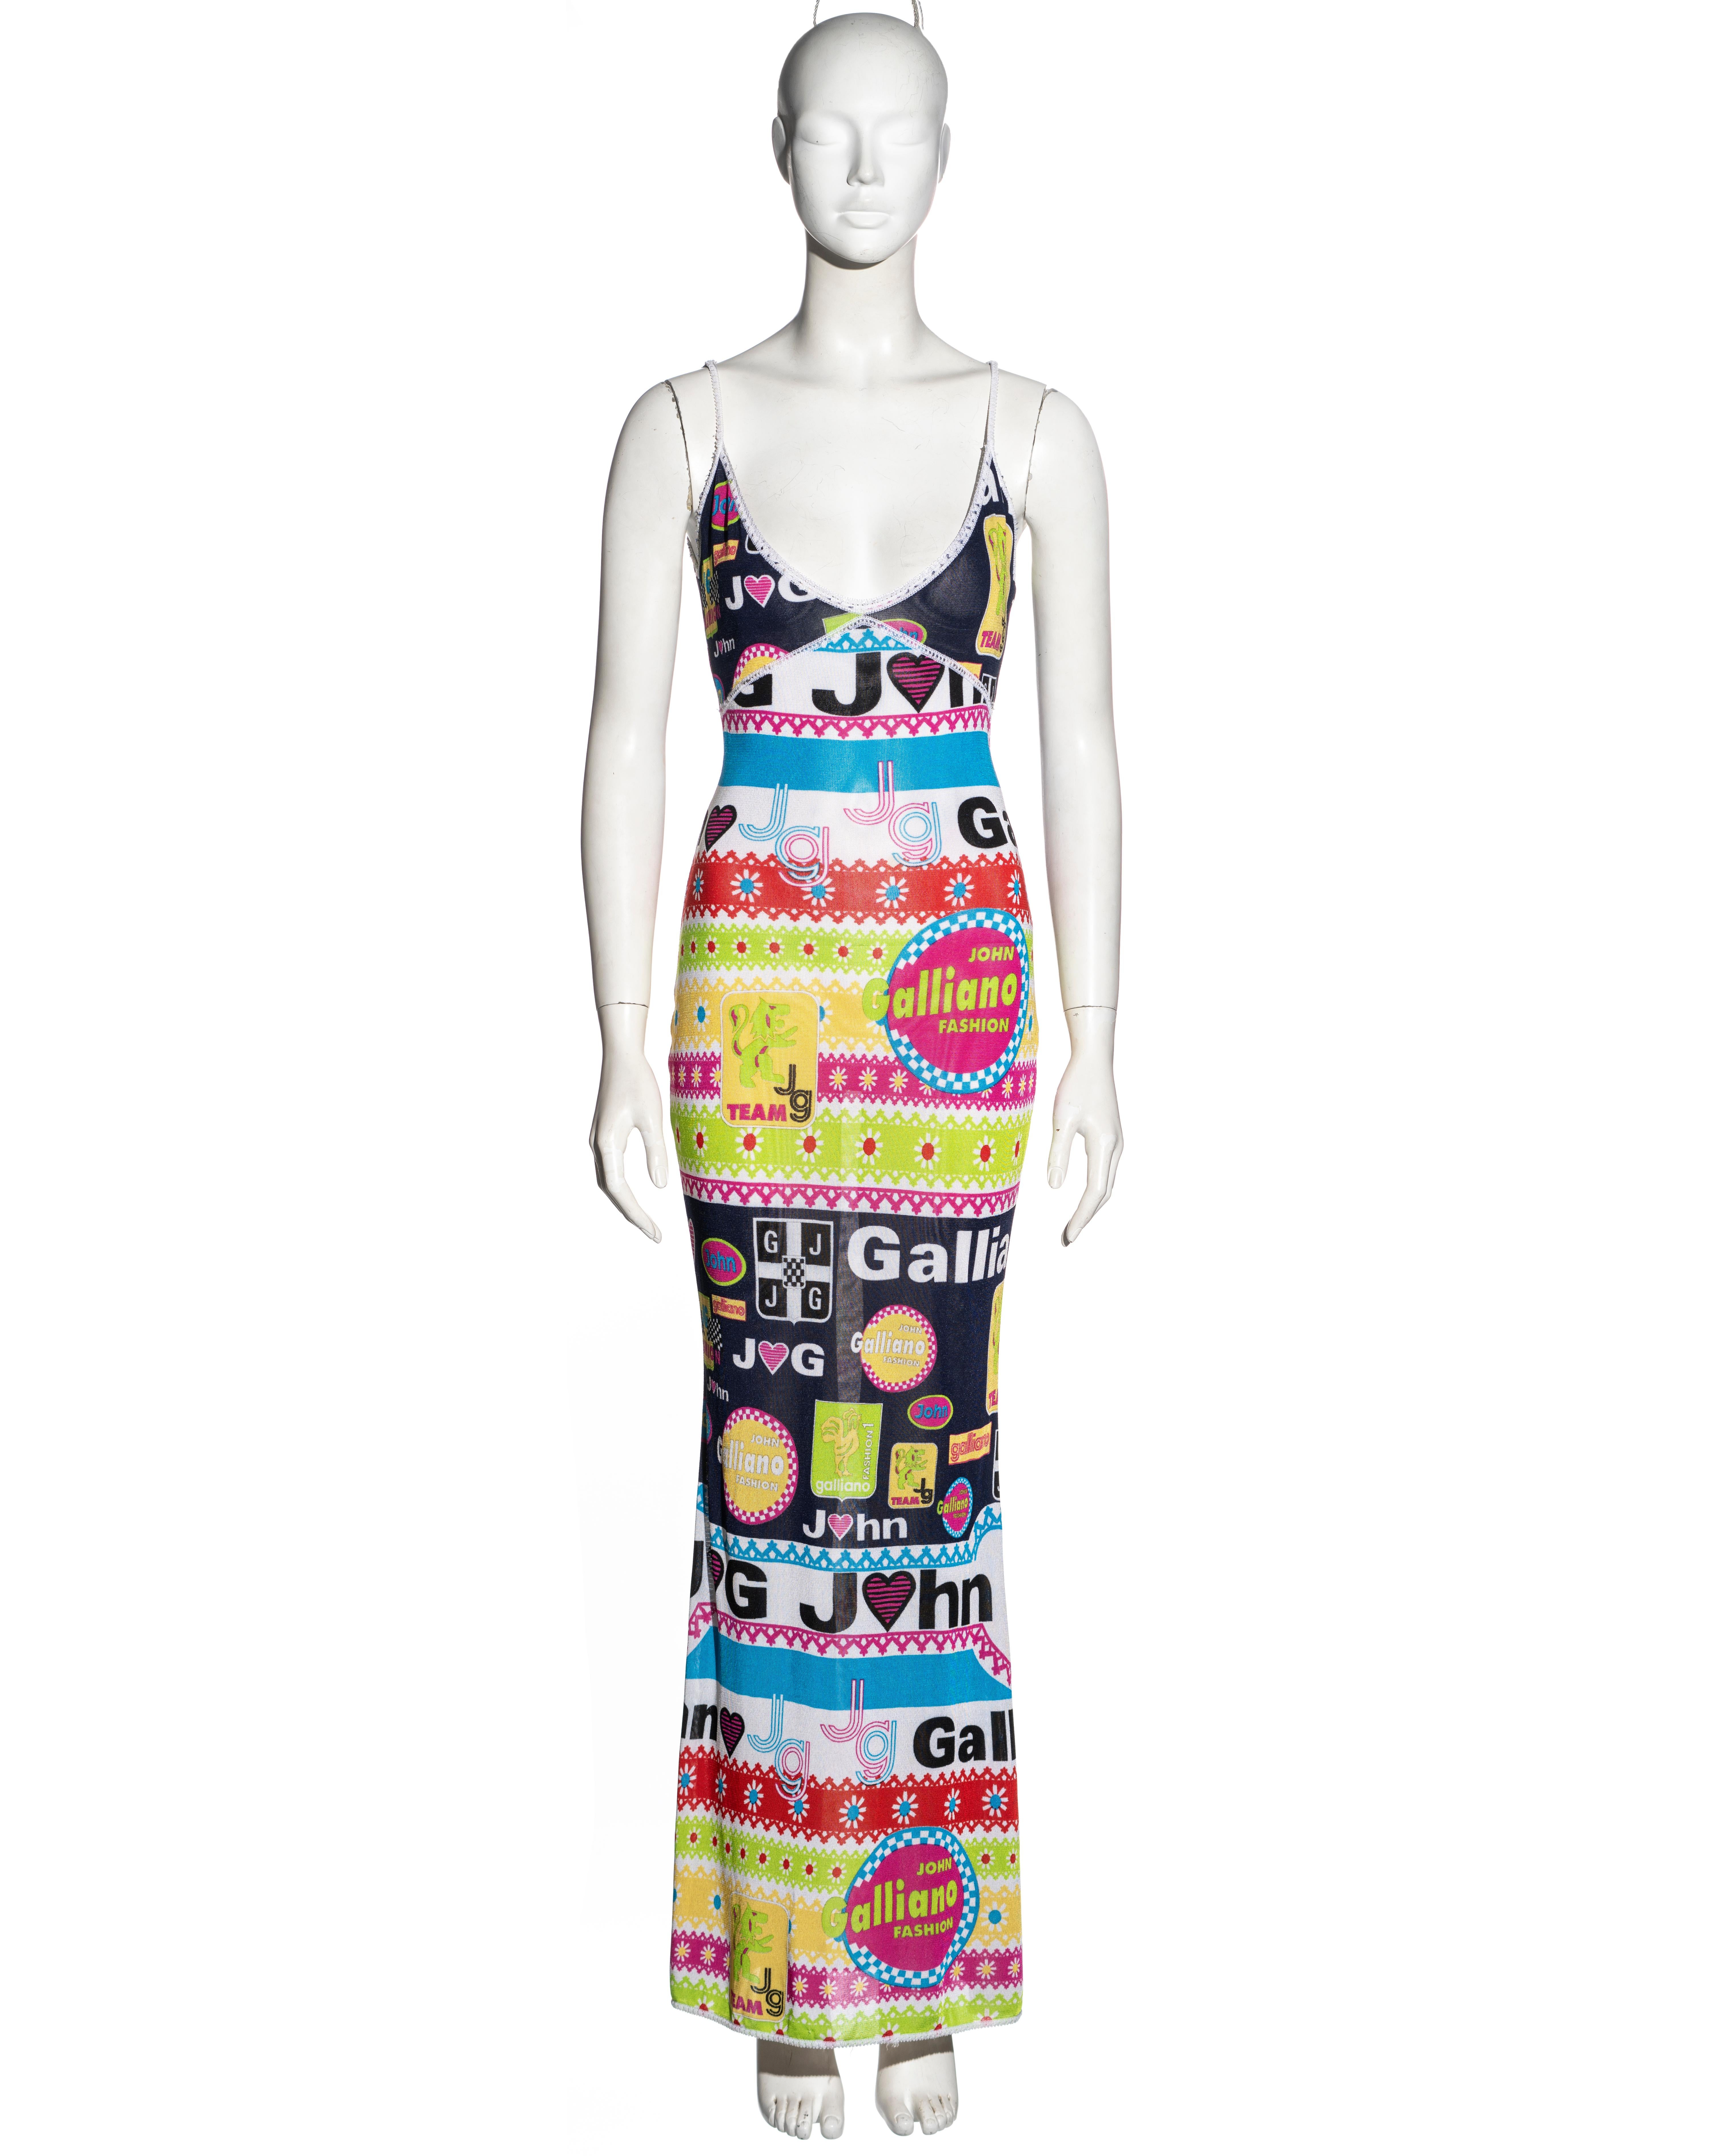 ▪ John Galliano maxi dress
▪ Sold by One of a Kind
▪ Constructed from a viscose knit with multicoloured Galliano branded artwork
▪ V-neck
▪ Spaghetti straps 
▪ Floor-length skirt
▪ Size Small
▪ Spring-Summer 2002
▪ 100% Viscose 
▪ Made in